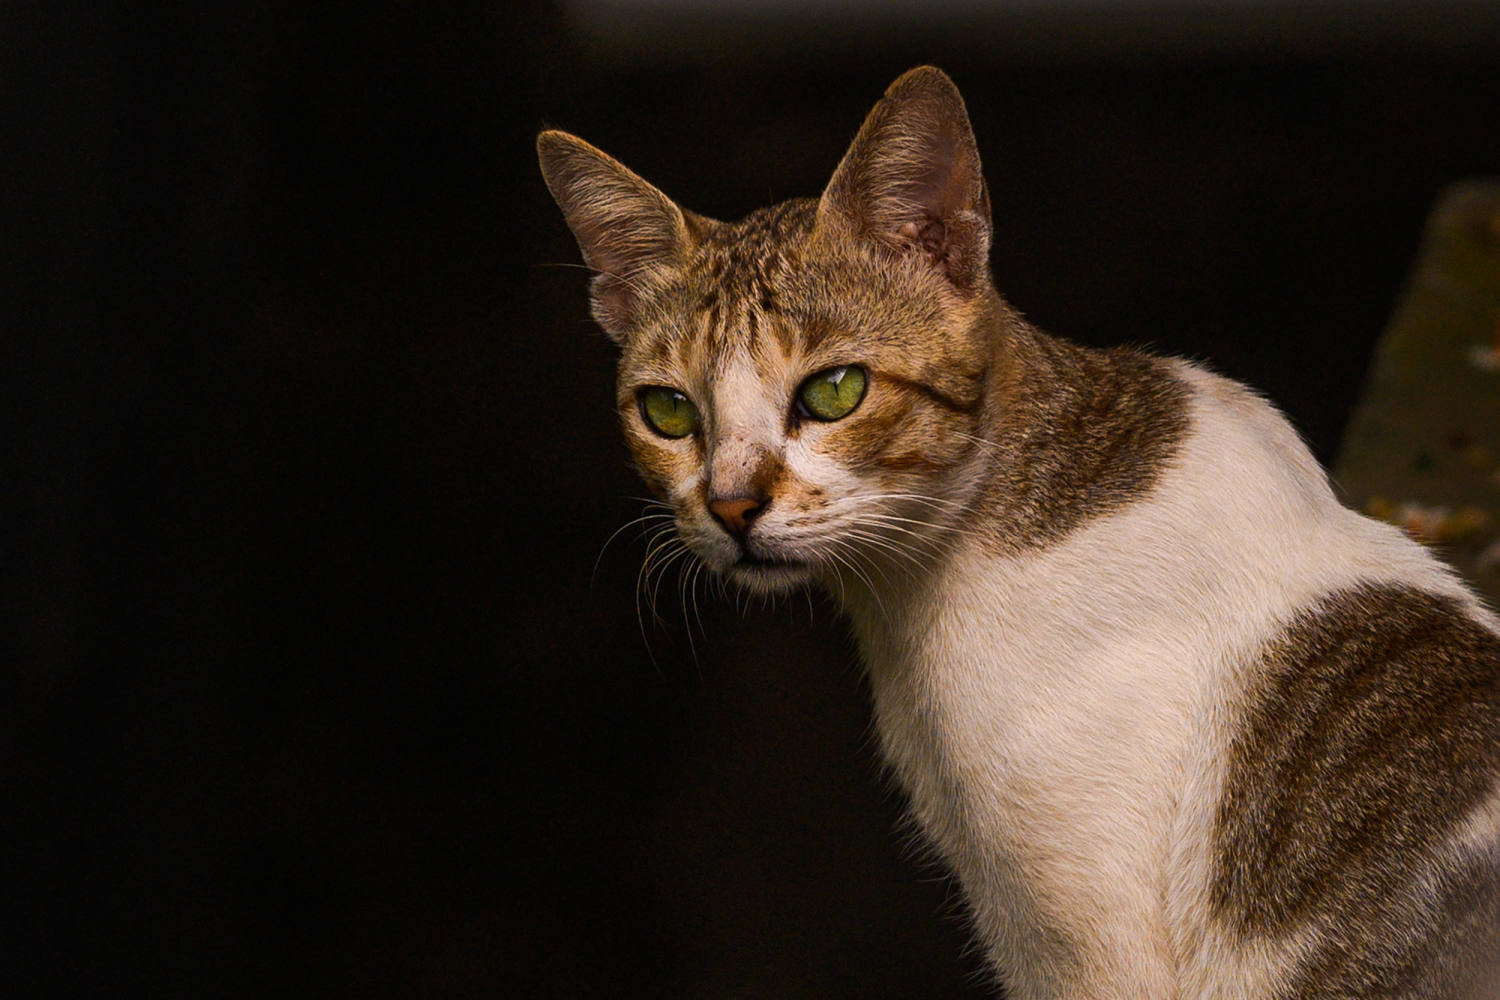 Oregon’s first case of human plague in 8 years likely came from a pet cat